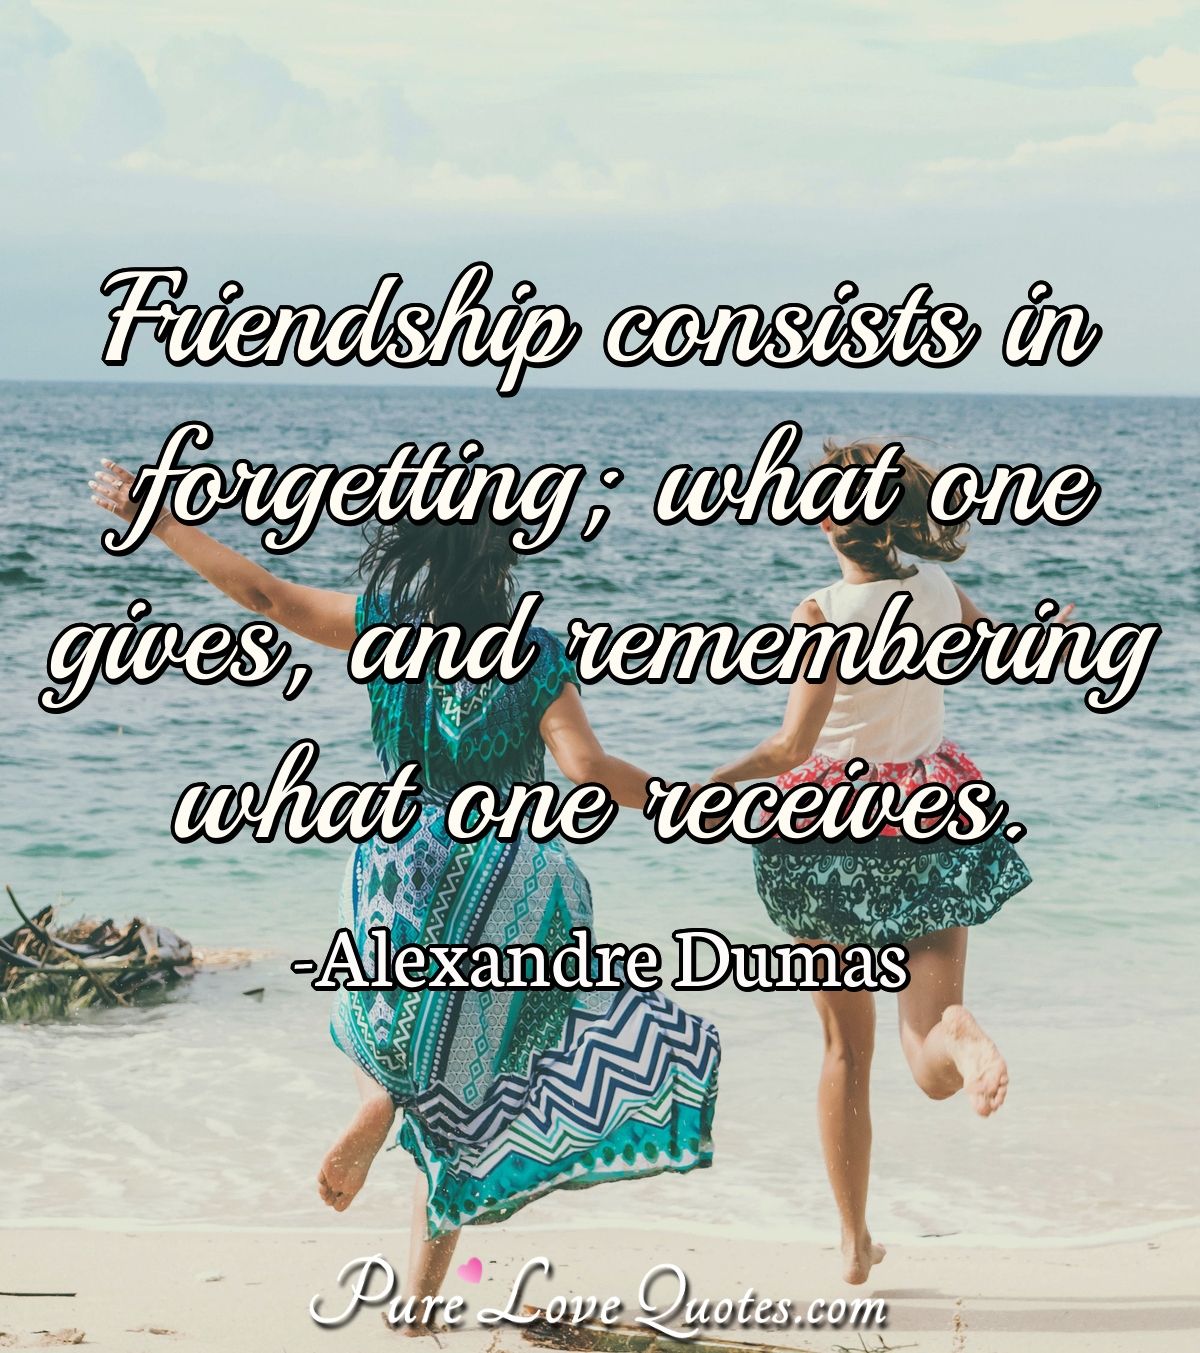 Friendship consists in forgetting; what one gives, and remembering what one receives. - Alexandre Dumas